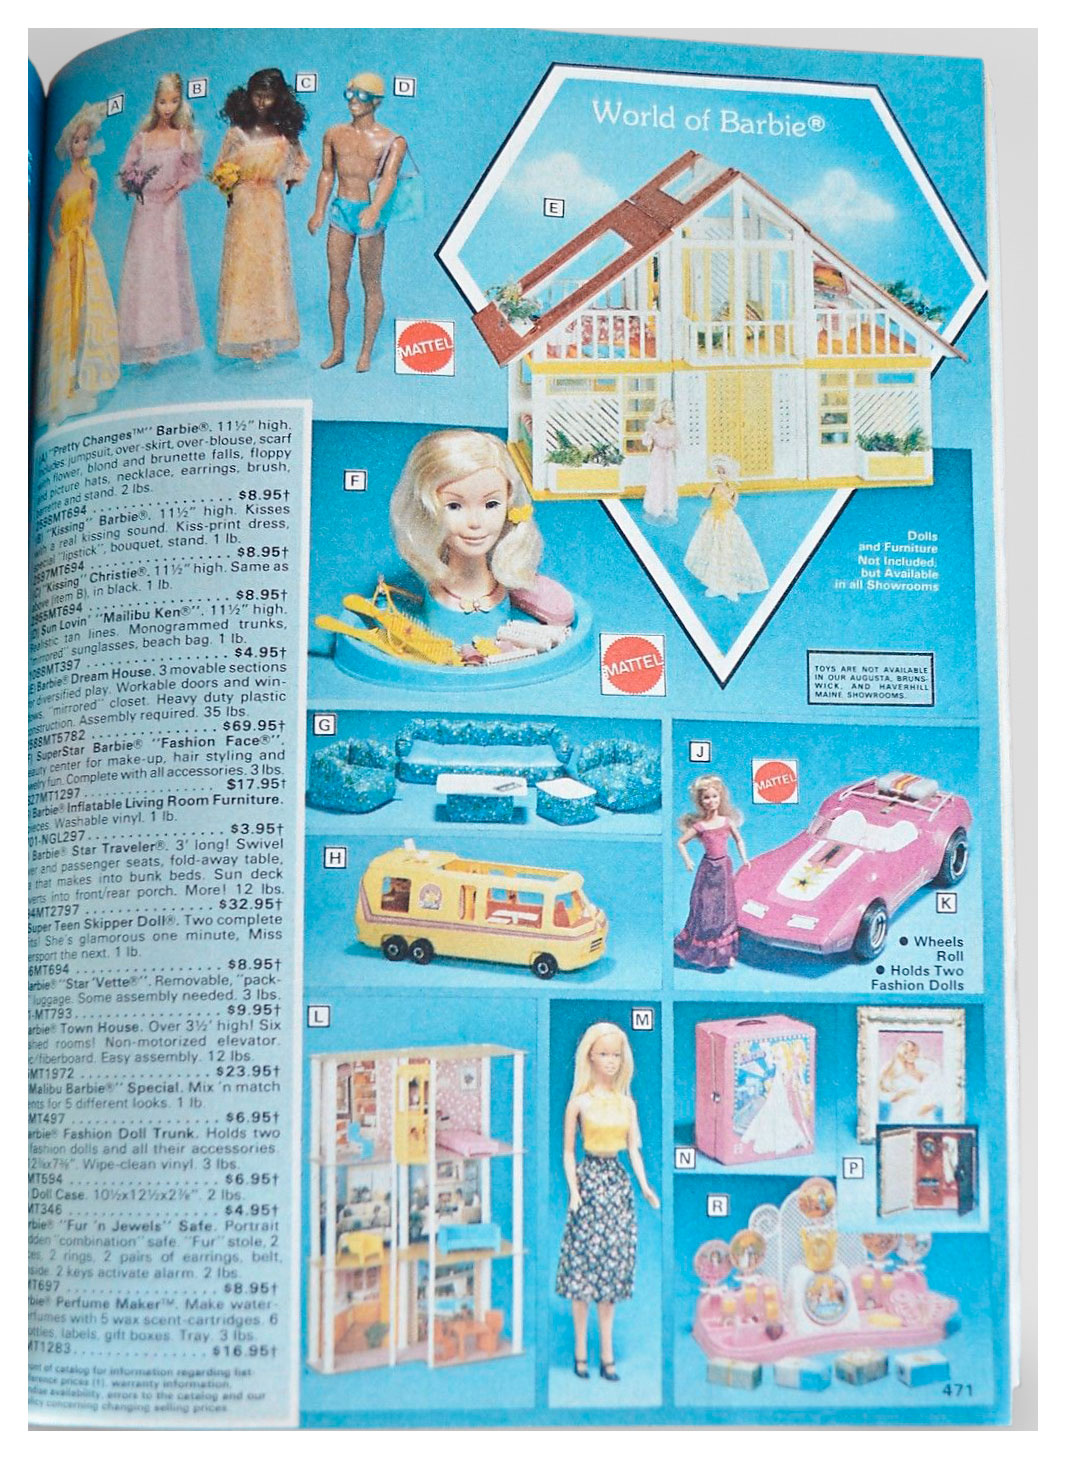 From 1979 Service Merchandise catalogue